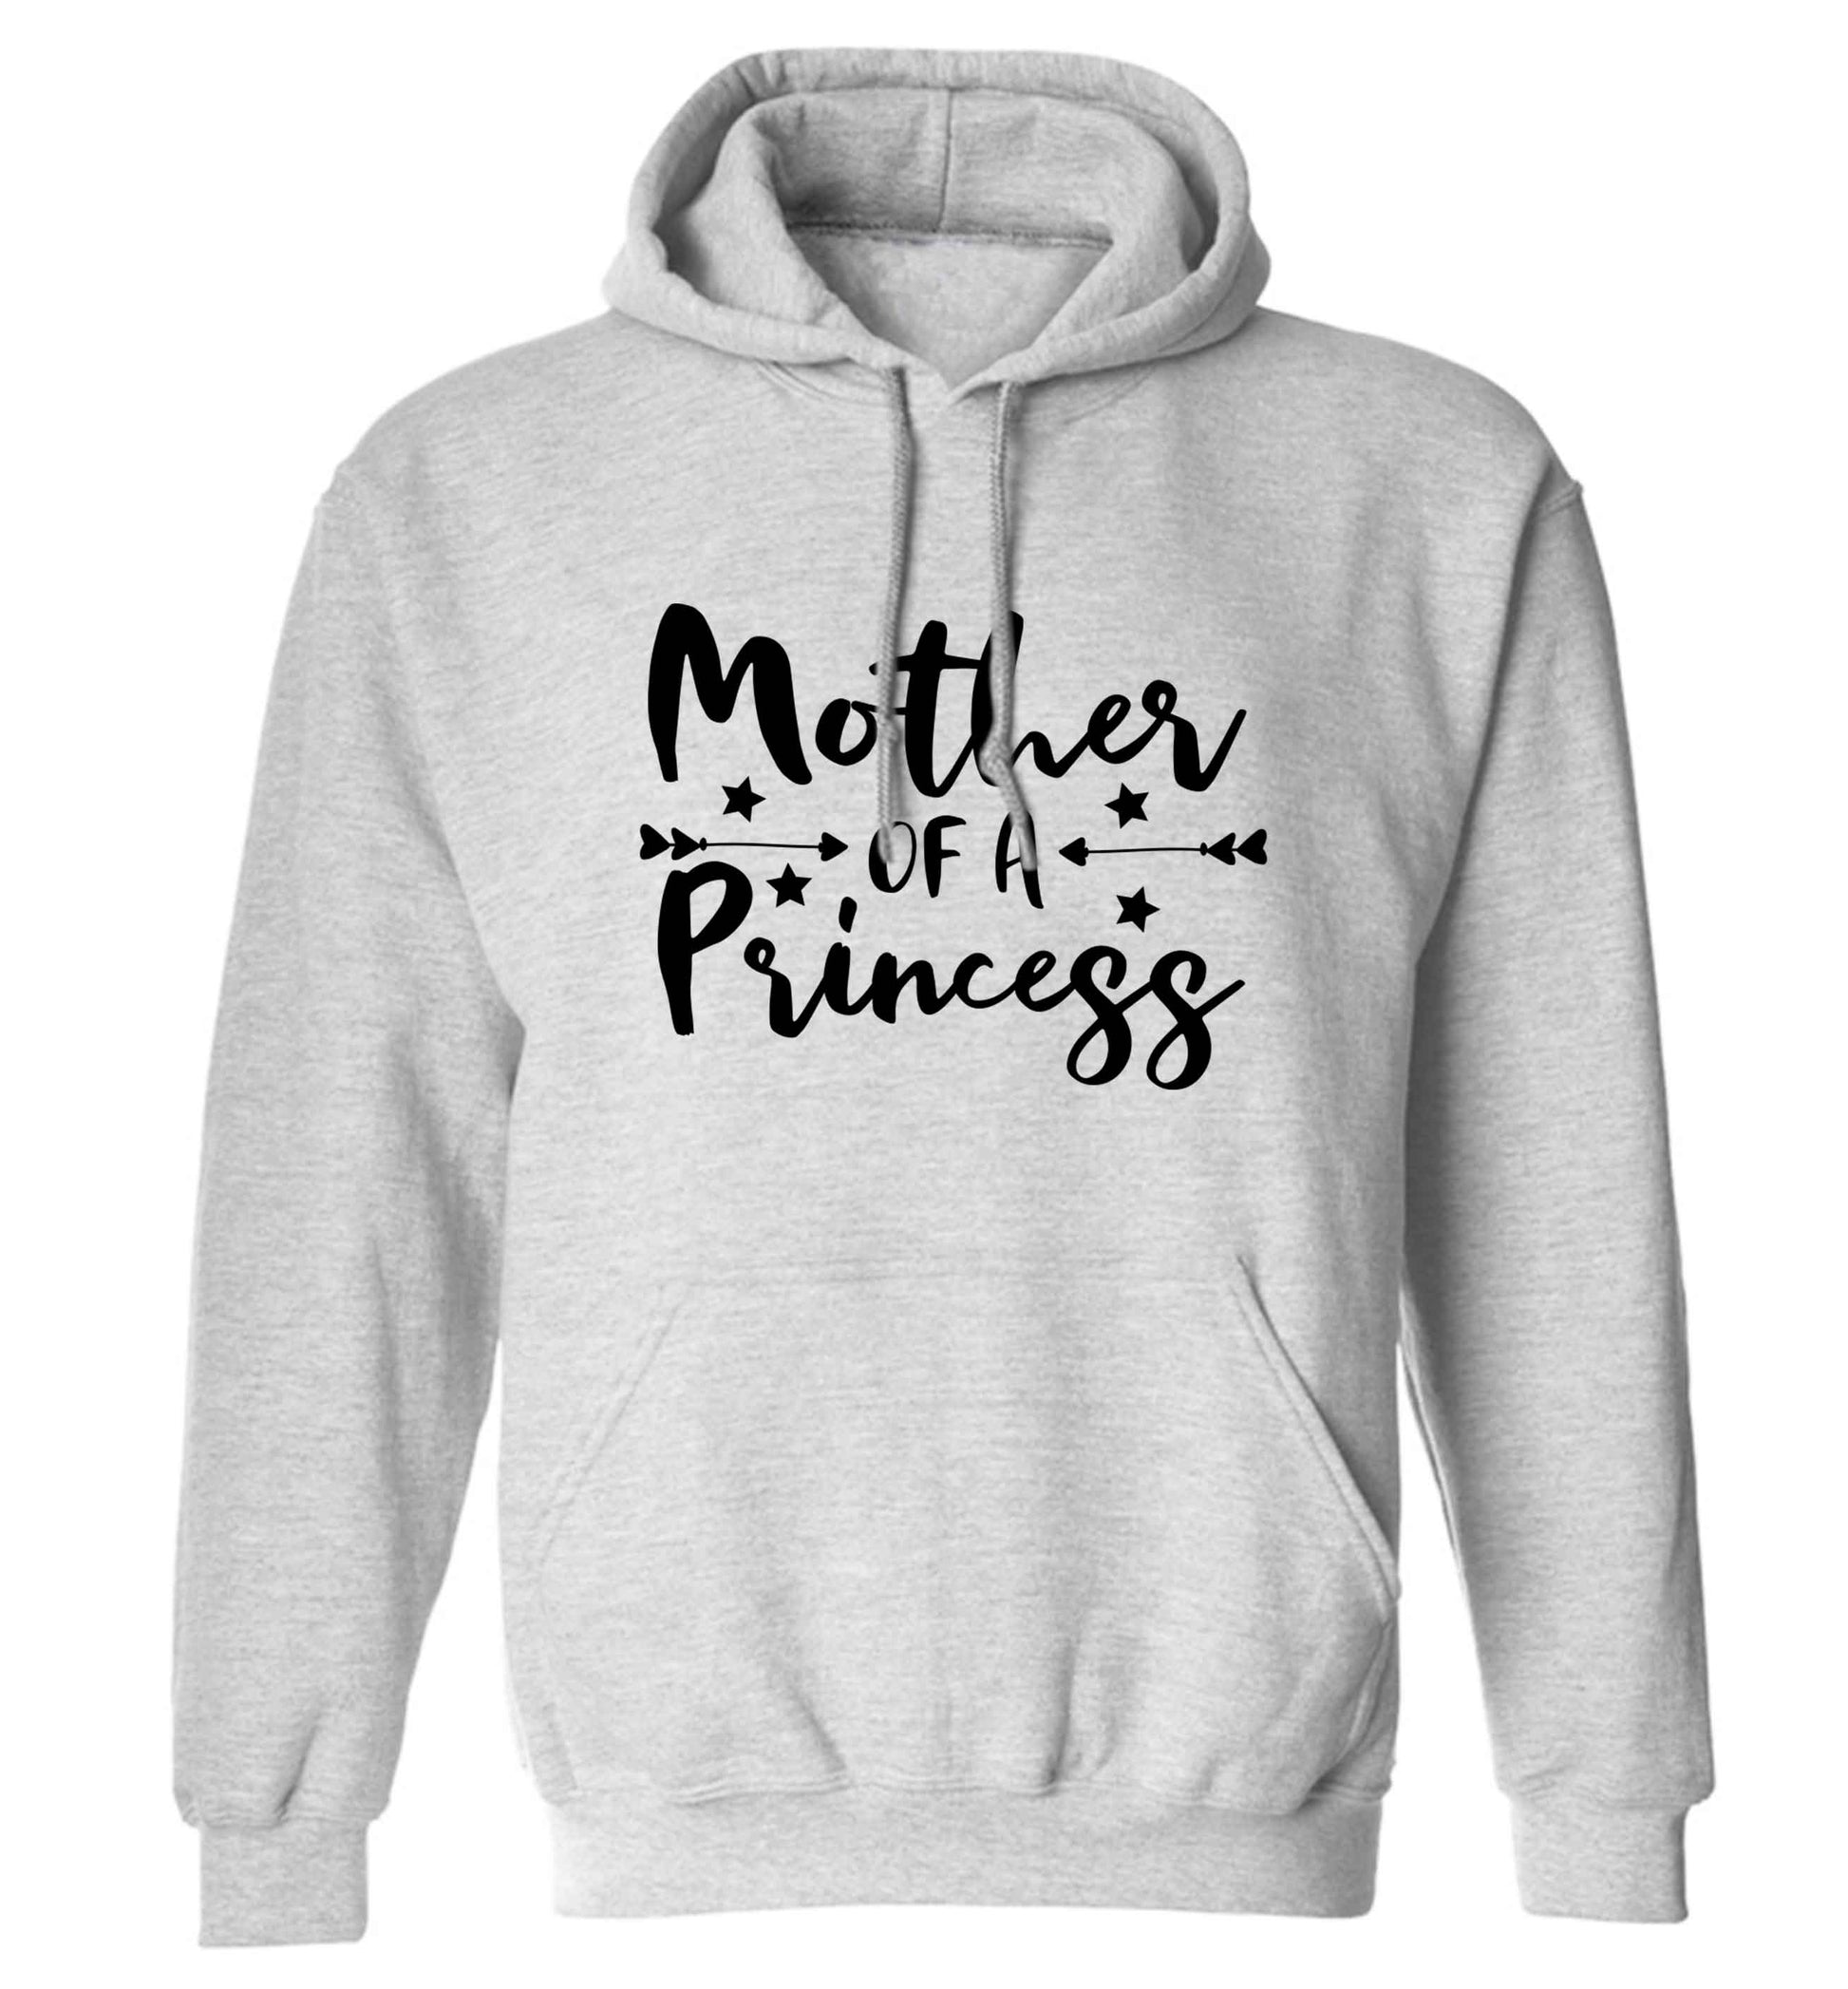 Mother of a princess adults unisex grey hoodie 2XL